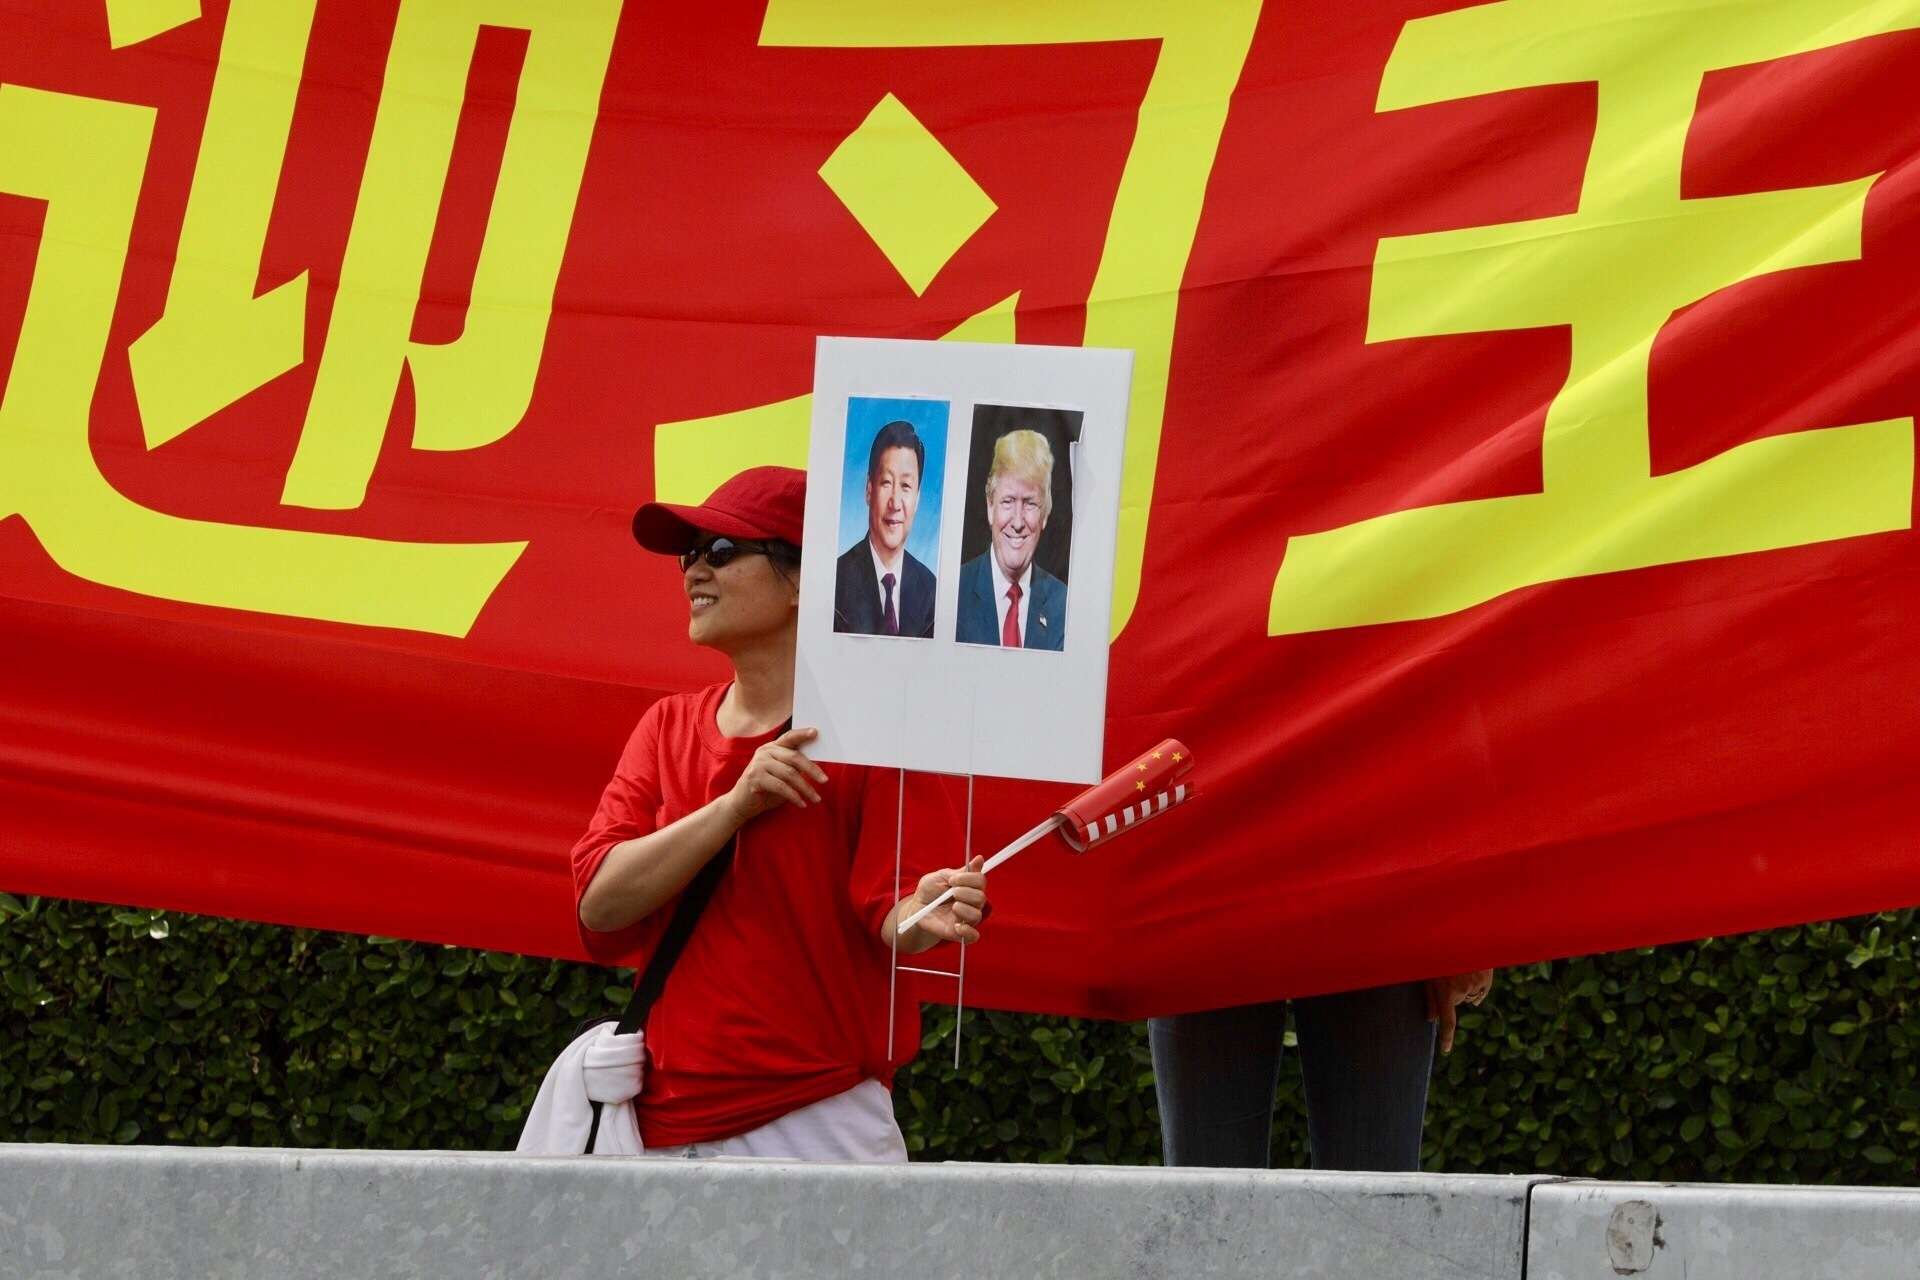 A supporter of President Xi Jinping stands on the street outside the Eau Palm Beach where Xi stayed during his summit with US President Donald Trump. Photo: AP Lannis Waters /Palm Beach Post via AP